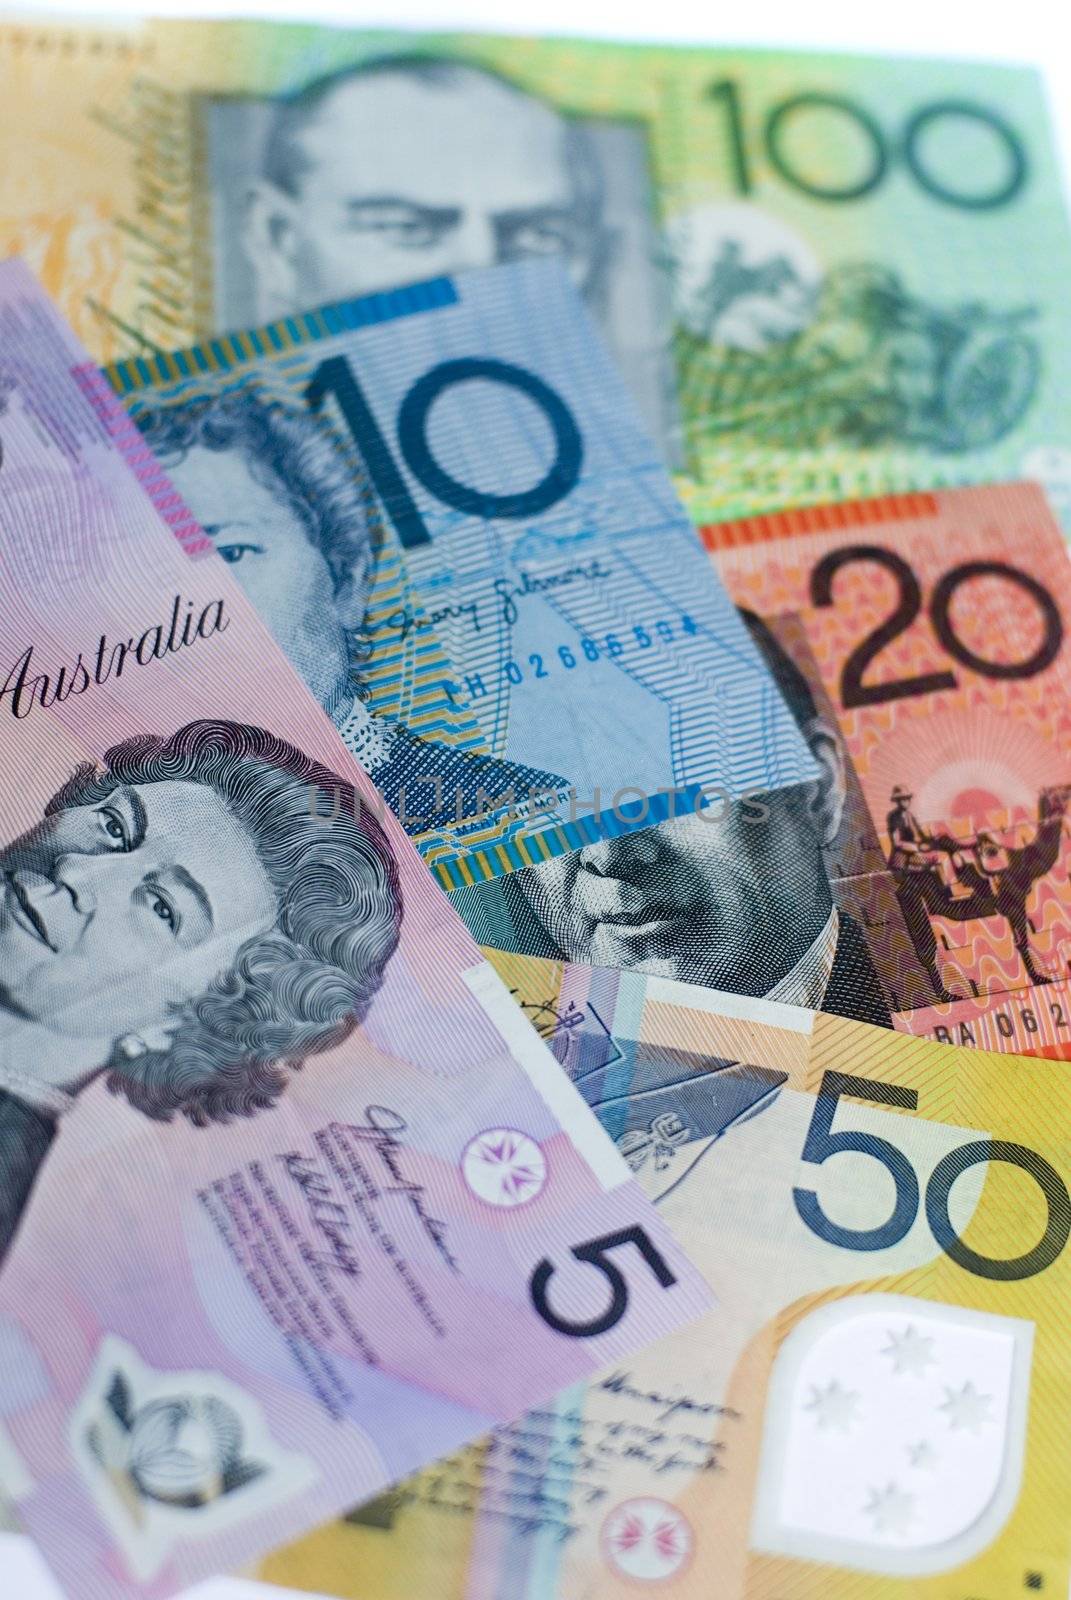 5 different denominations of australian bank notes